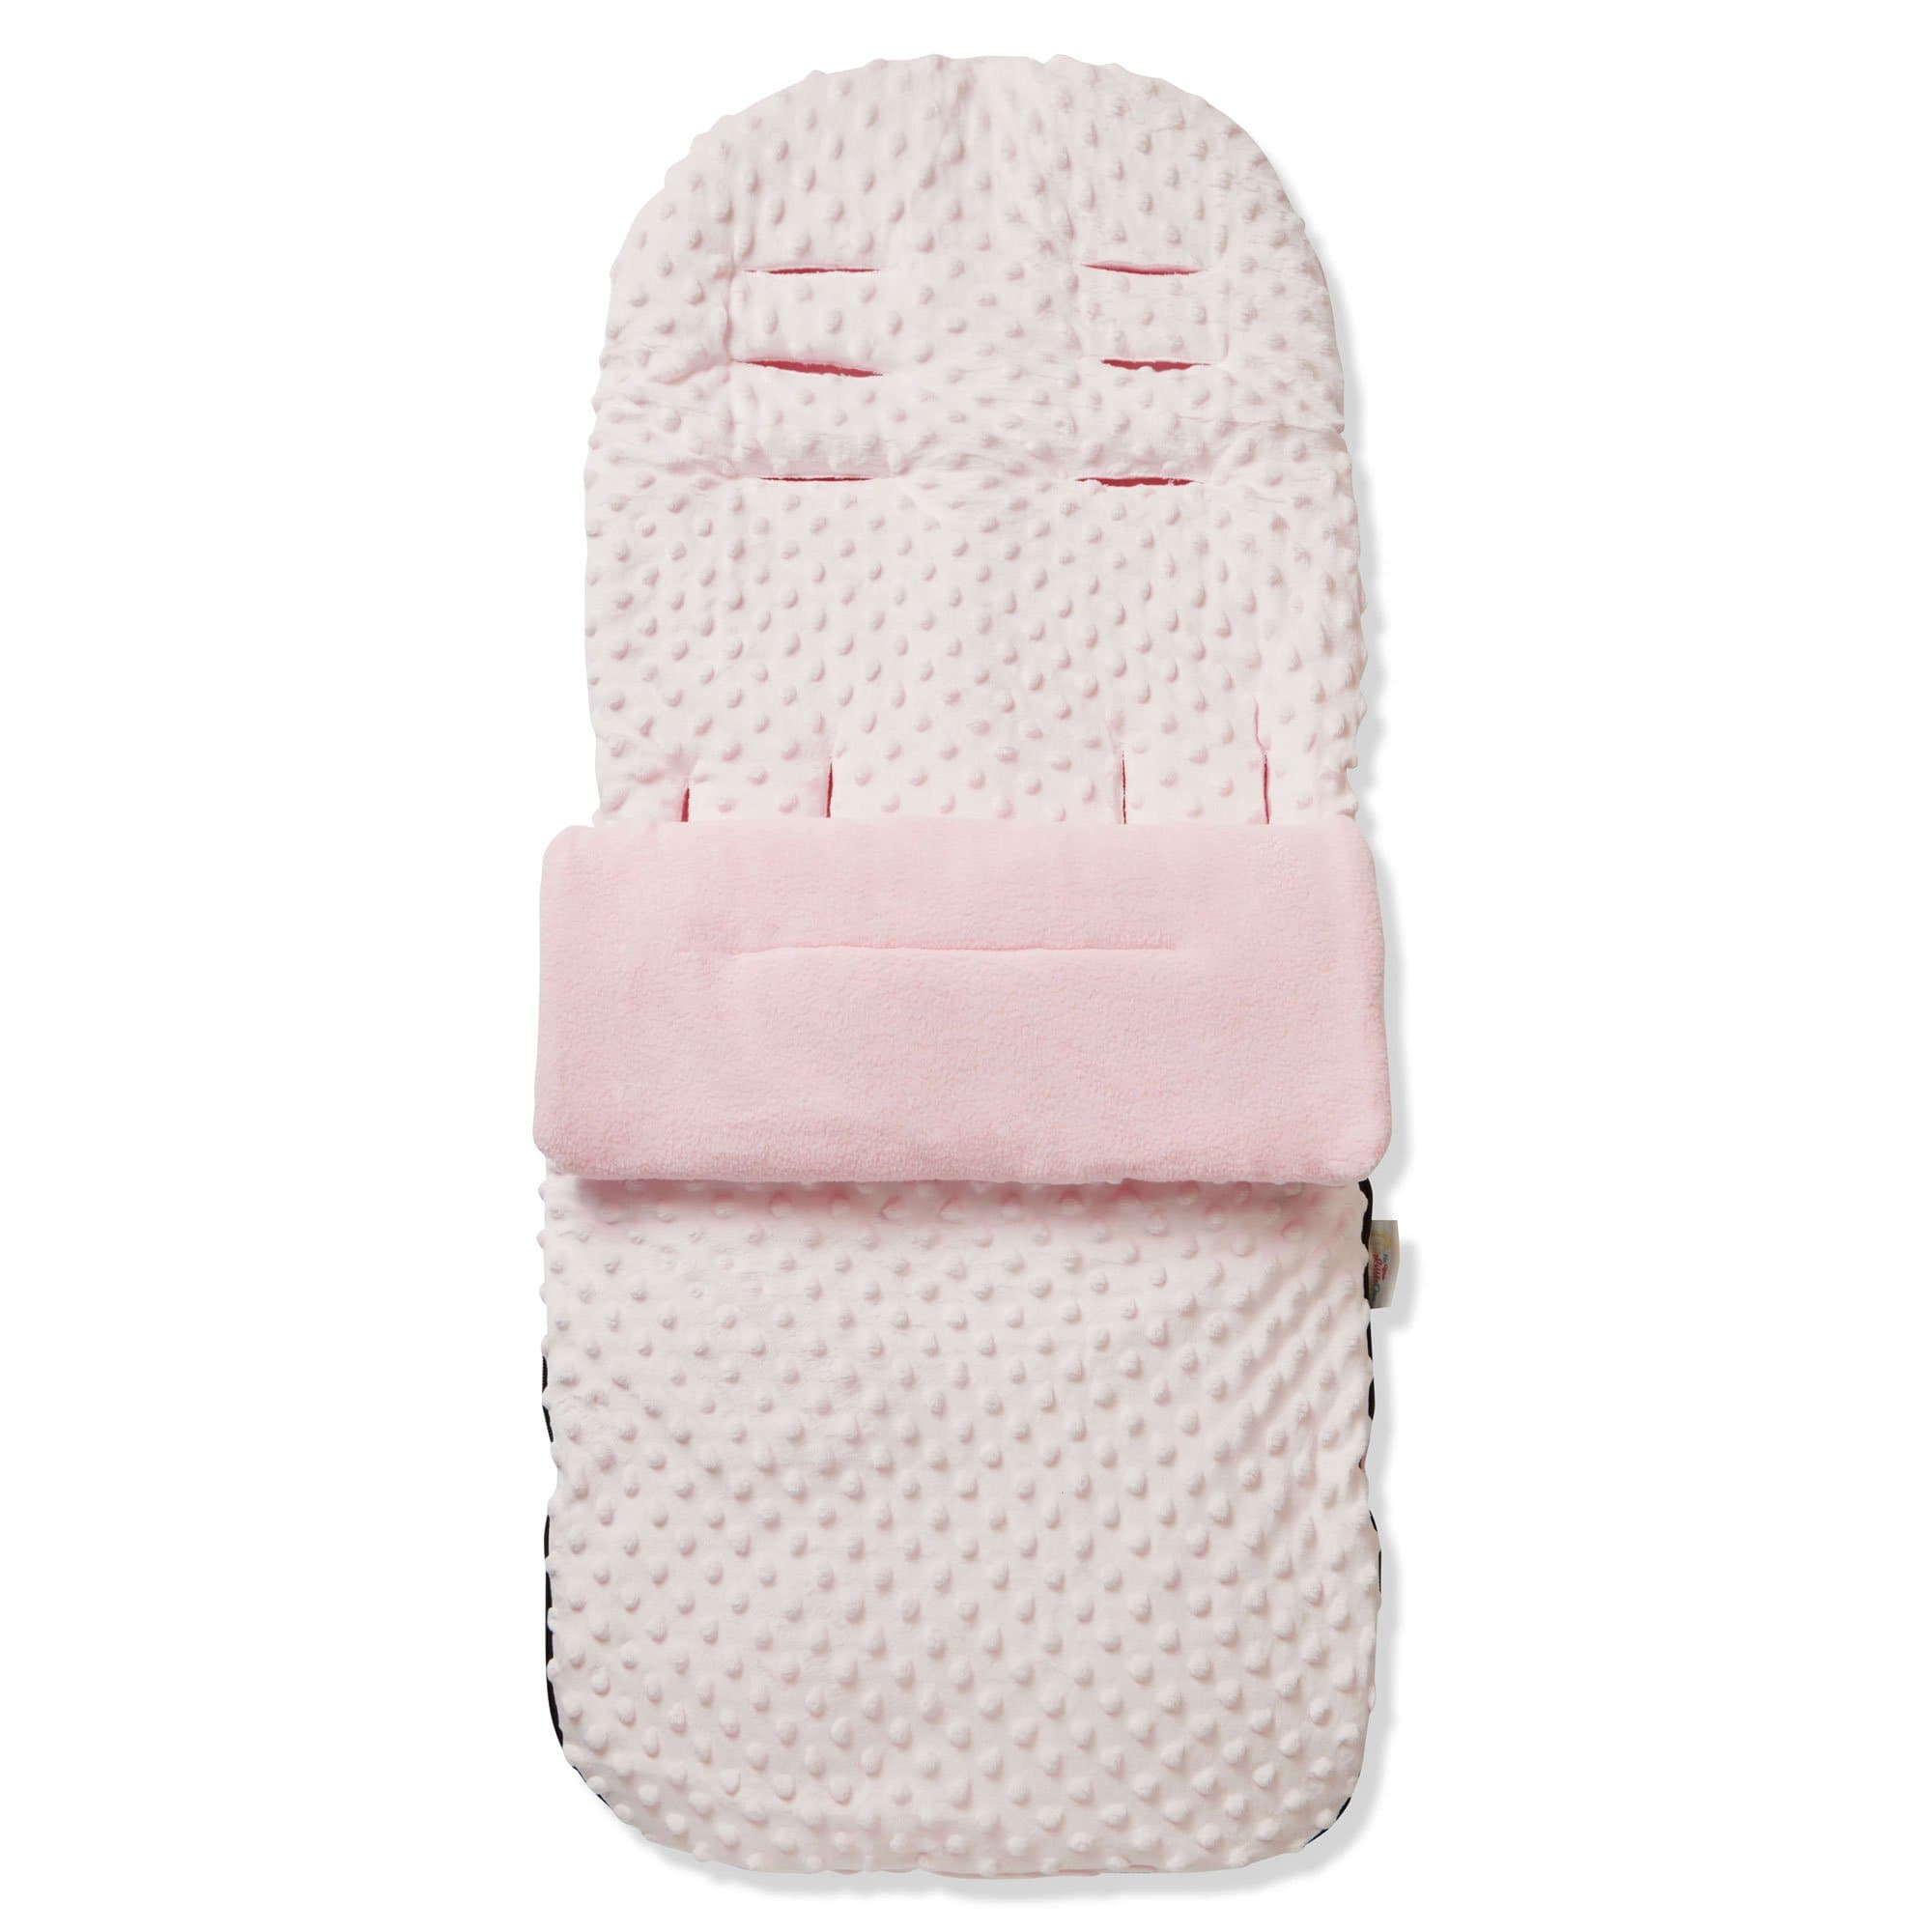 Dimple Footmuff / Cosy Toes Compatible with iCandy - Pink / Fits All Models | For Your Little One